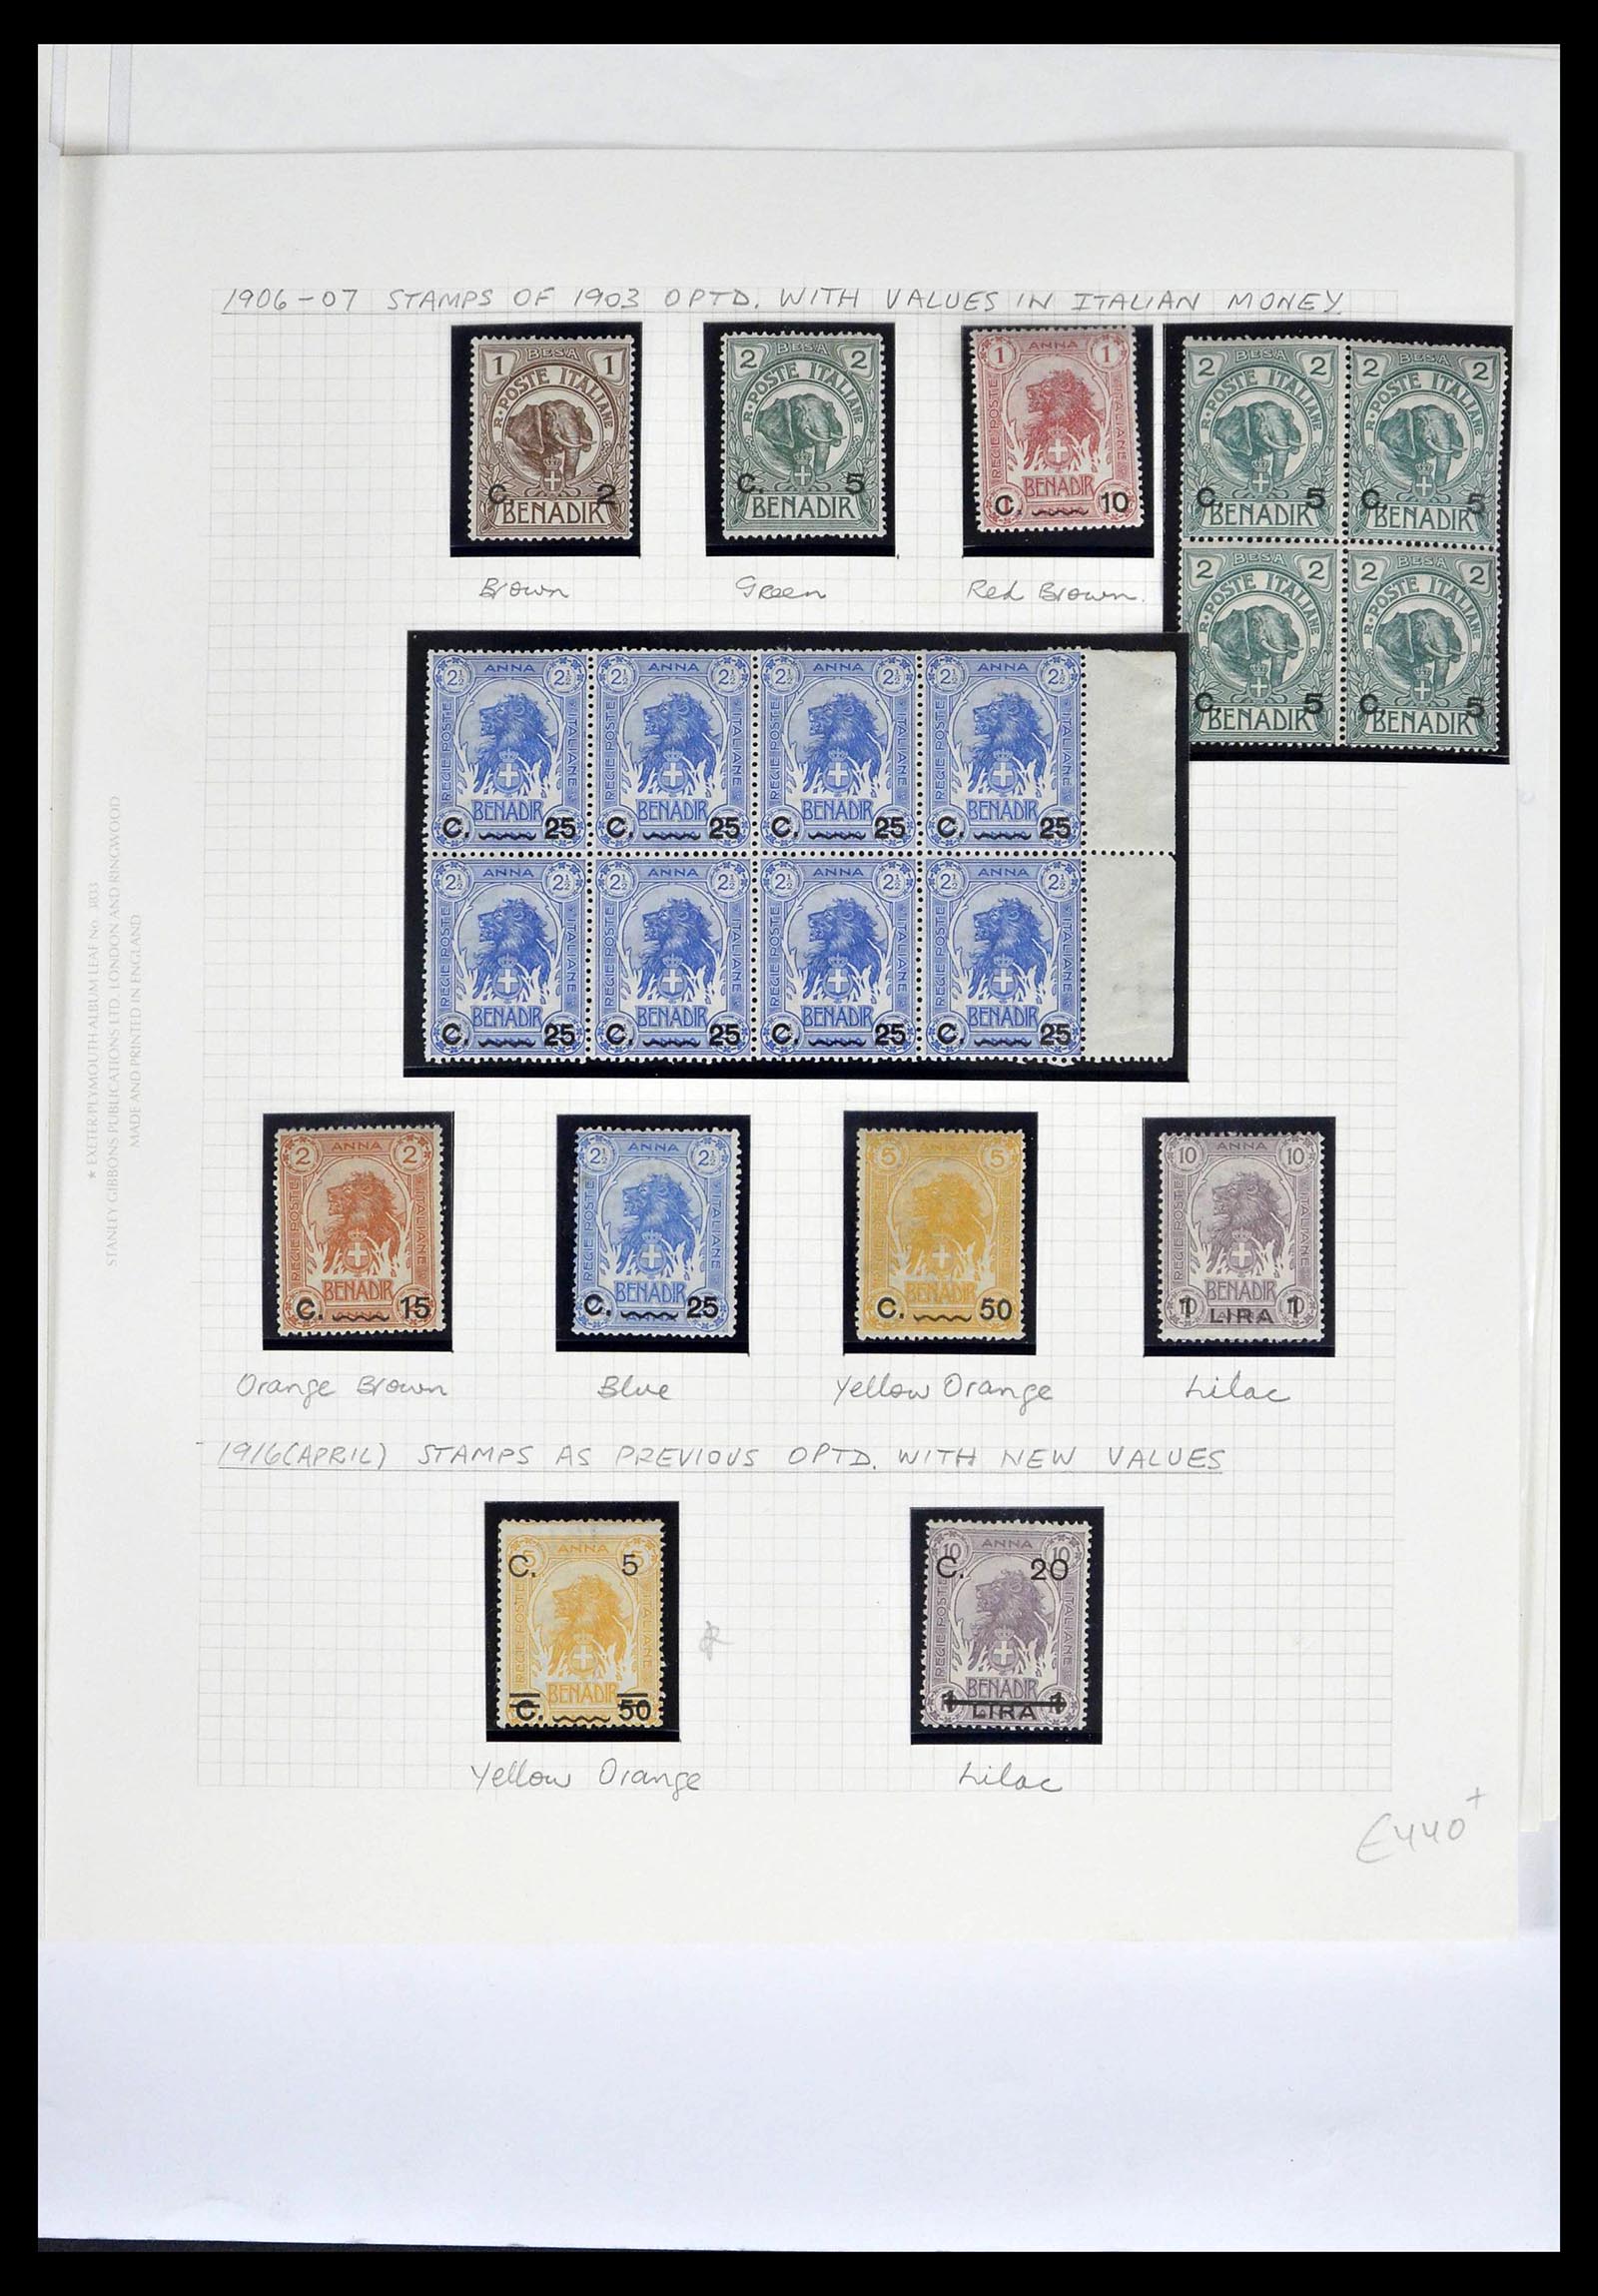 39058 0006 - Stamp collection 39058 Somalia complete 1903-1960.